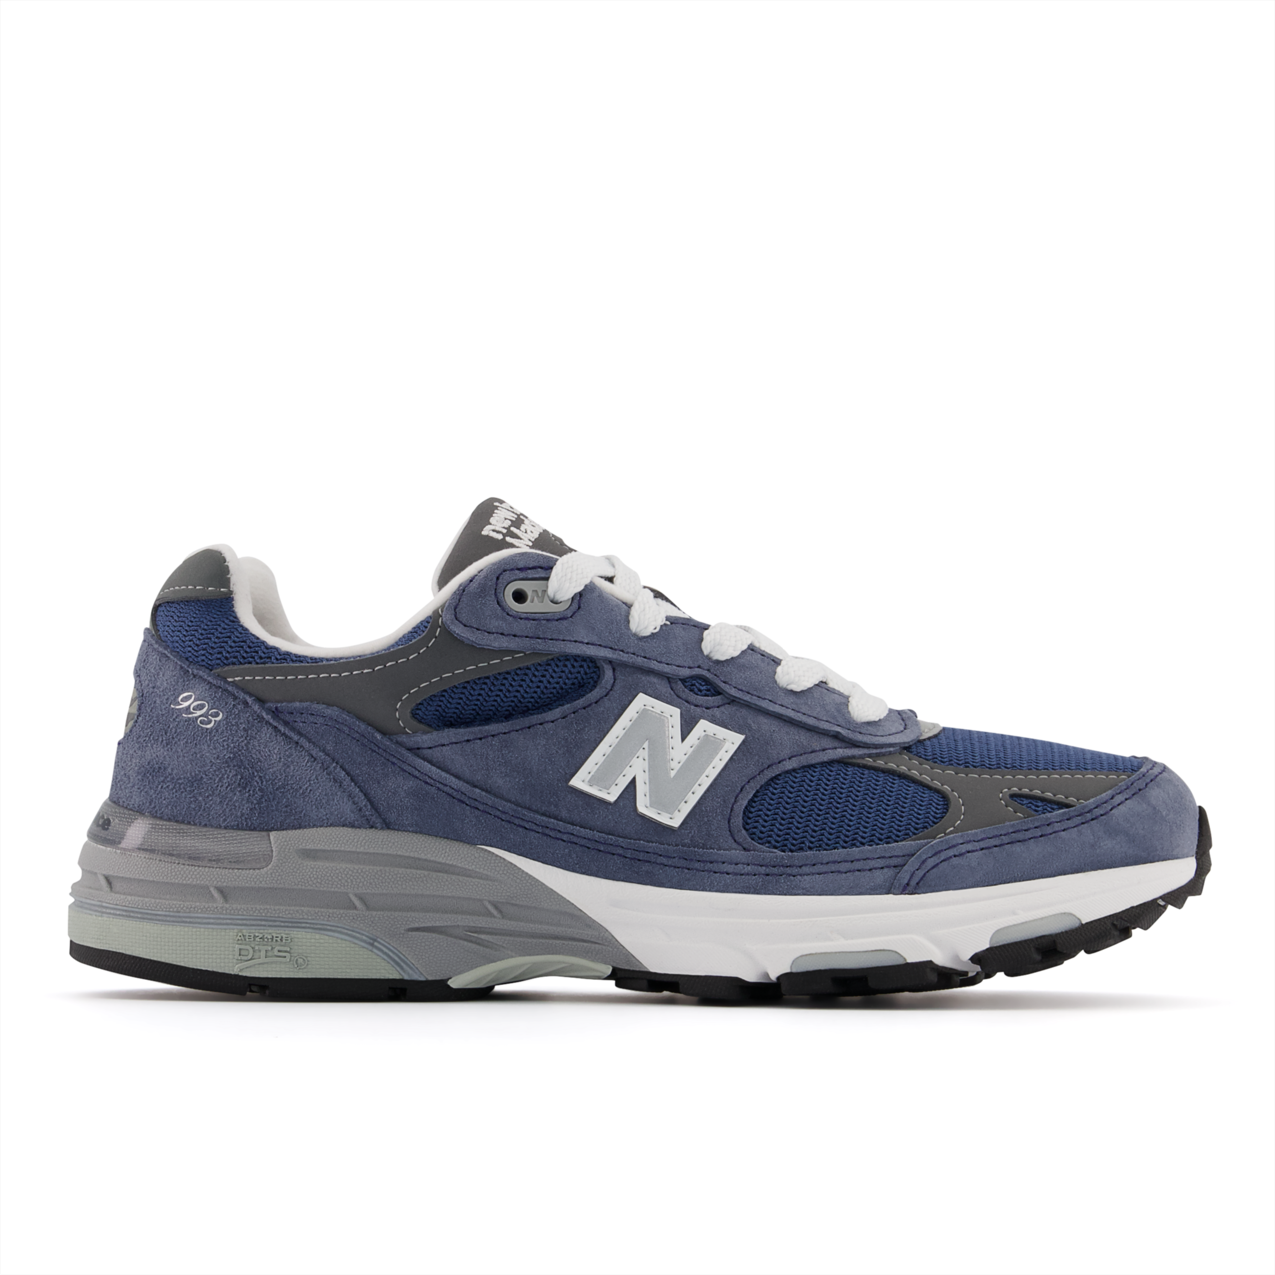 NEW BALANCE W993 MADE IN USA Womens Sneakers – ASPHALT